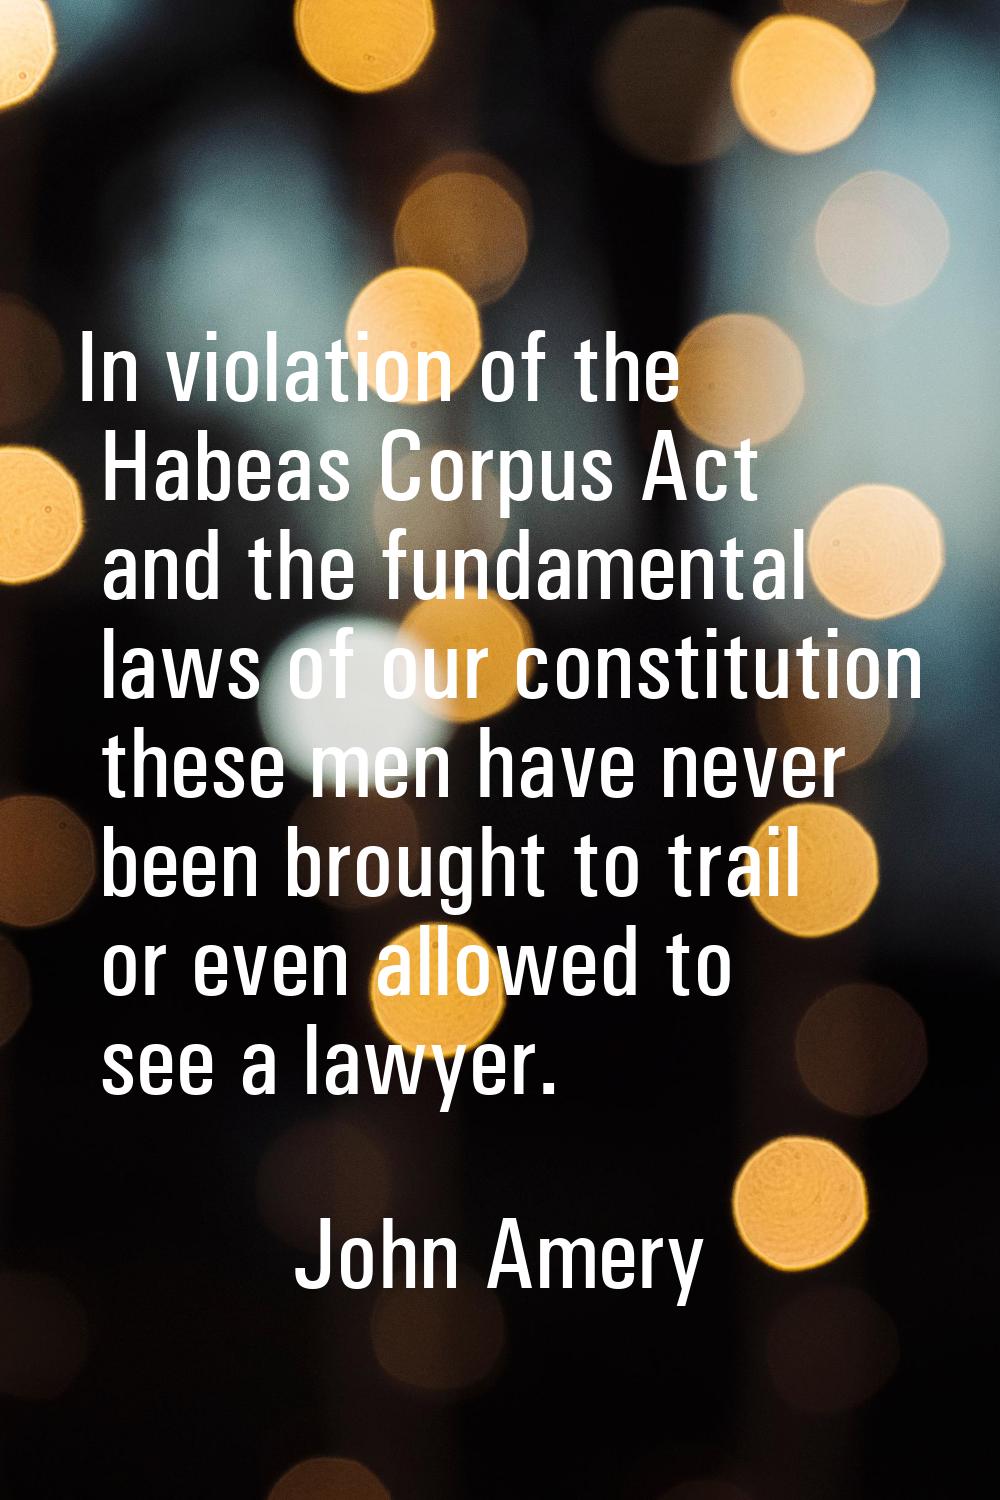 In violation of the Habeas Corpus Act and the fundamental laws of our constitution these men have n